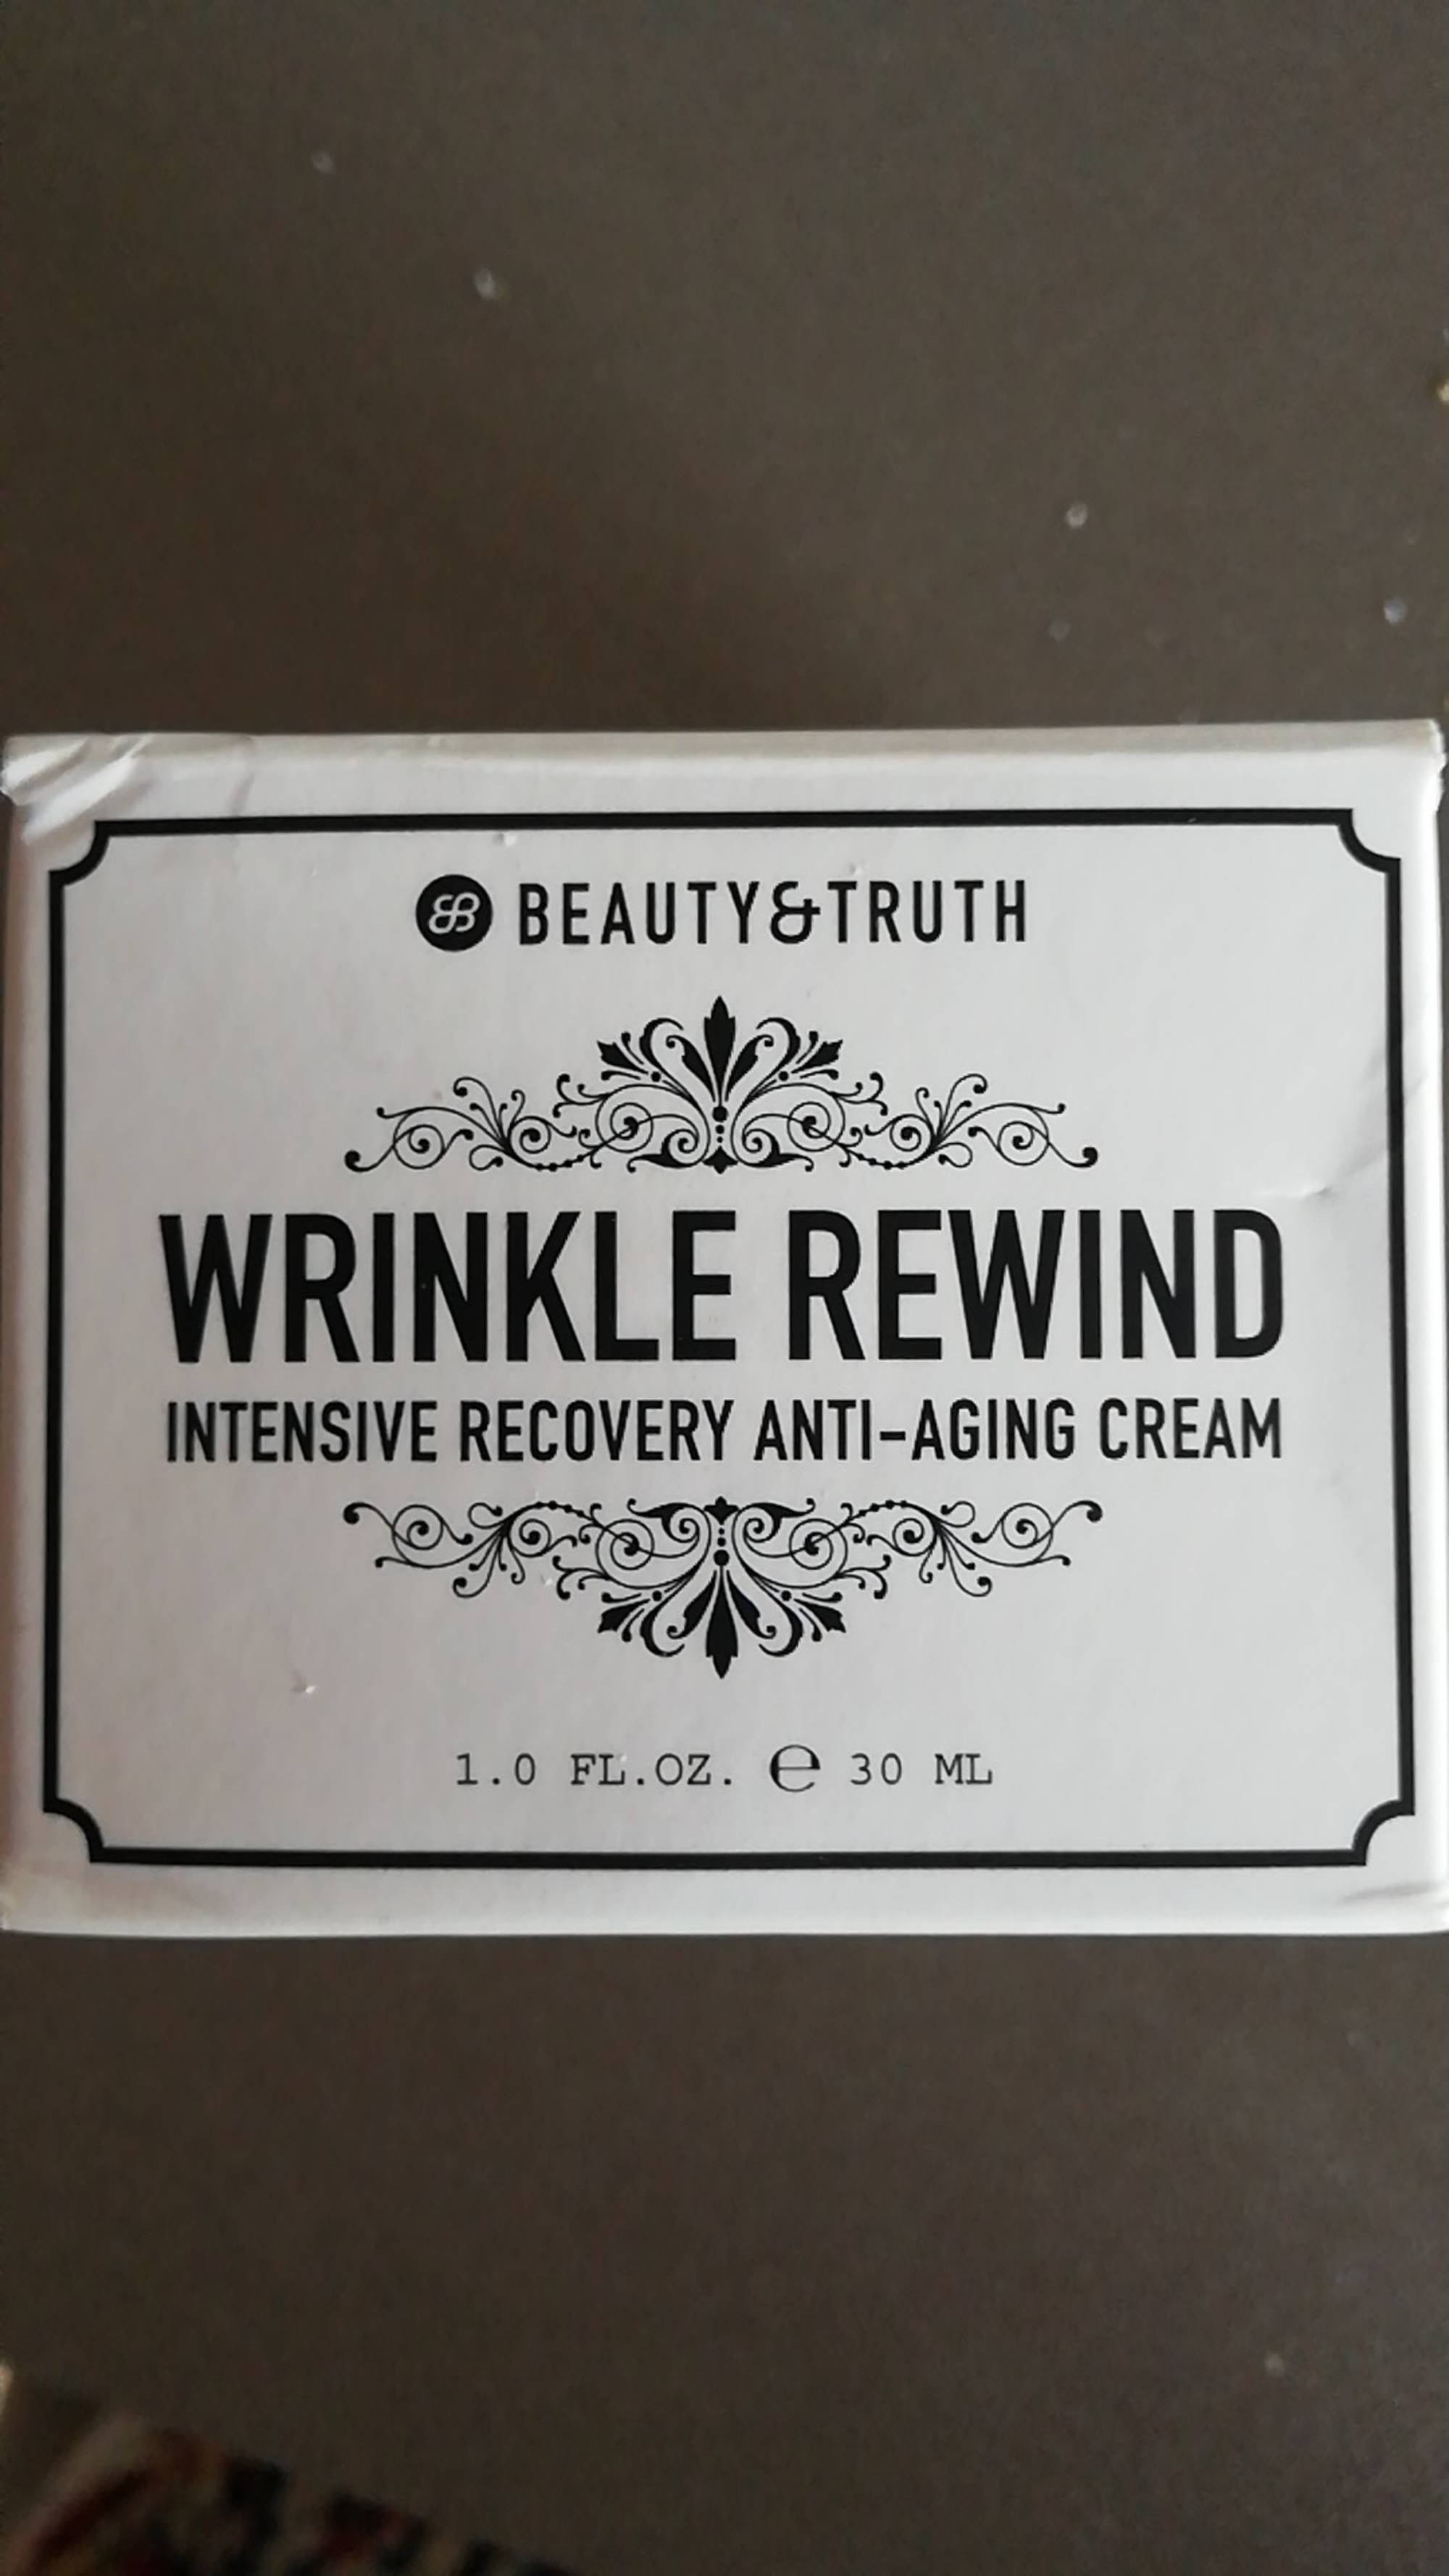 BEAUTY & TRUTH - Wrinkle rewind - Intensive recovery anti-aging cream